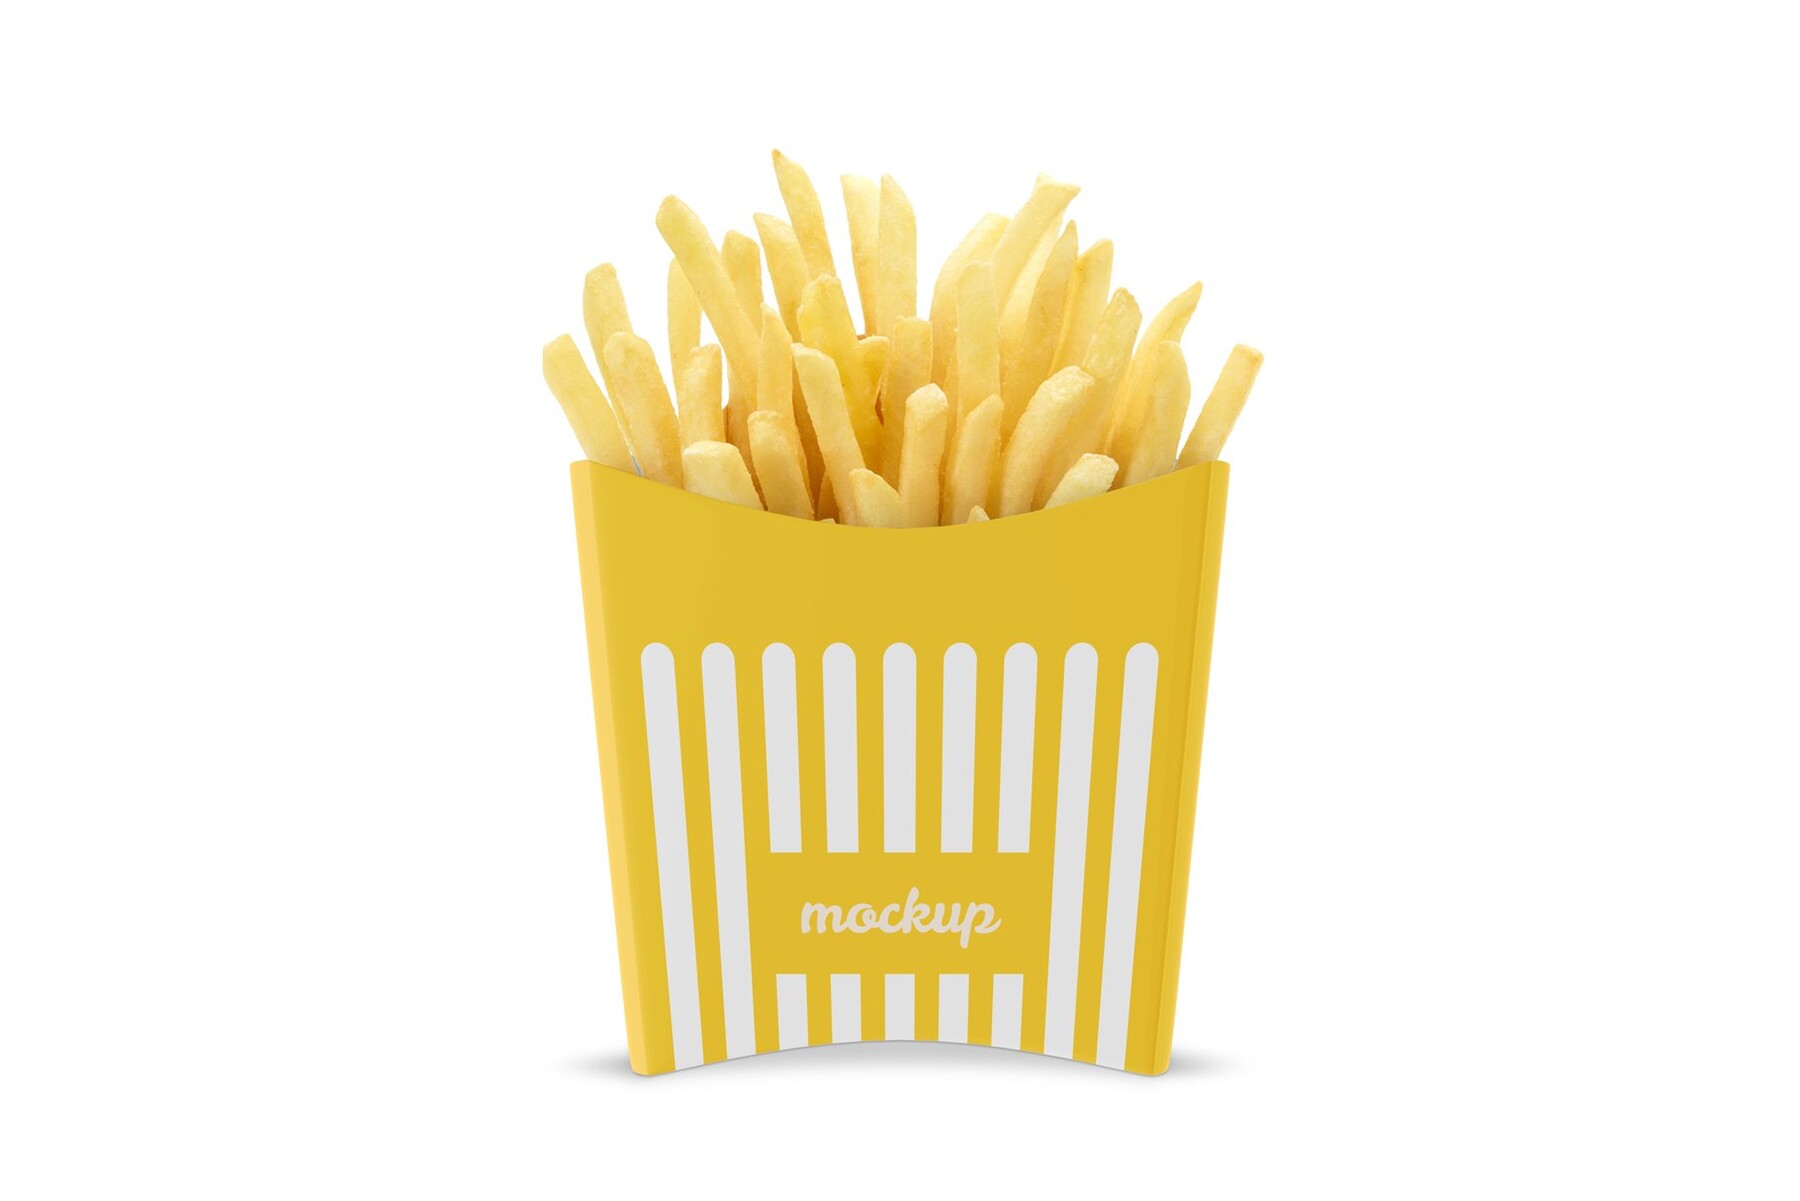 Free French Fries Packaging Mockup PSD - Good Mockups